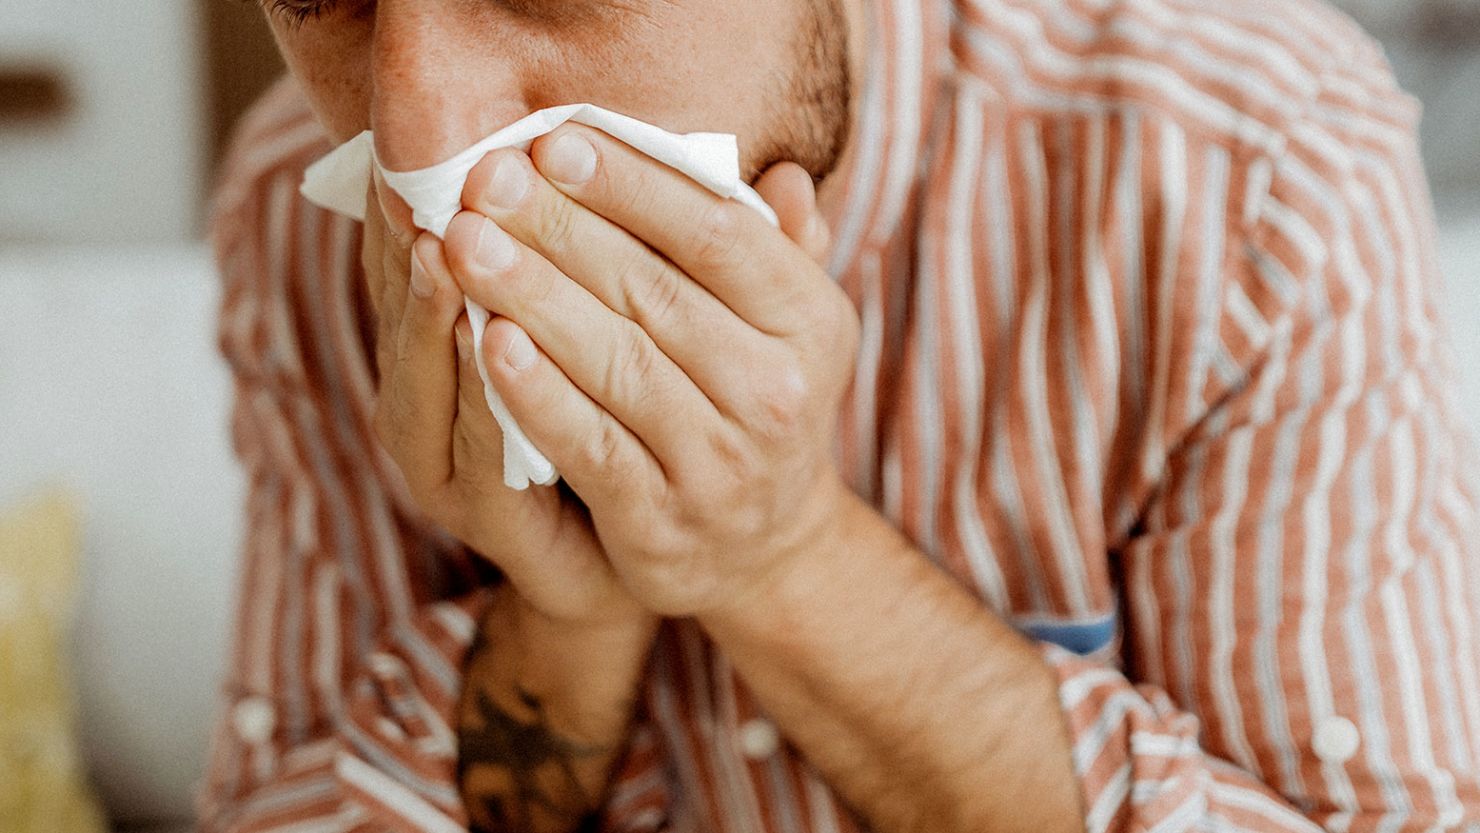 Nearly 4 out of 10 US households had a recent case of Covid-19, the flu or RSV, a survey found.